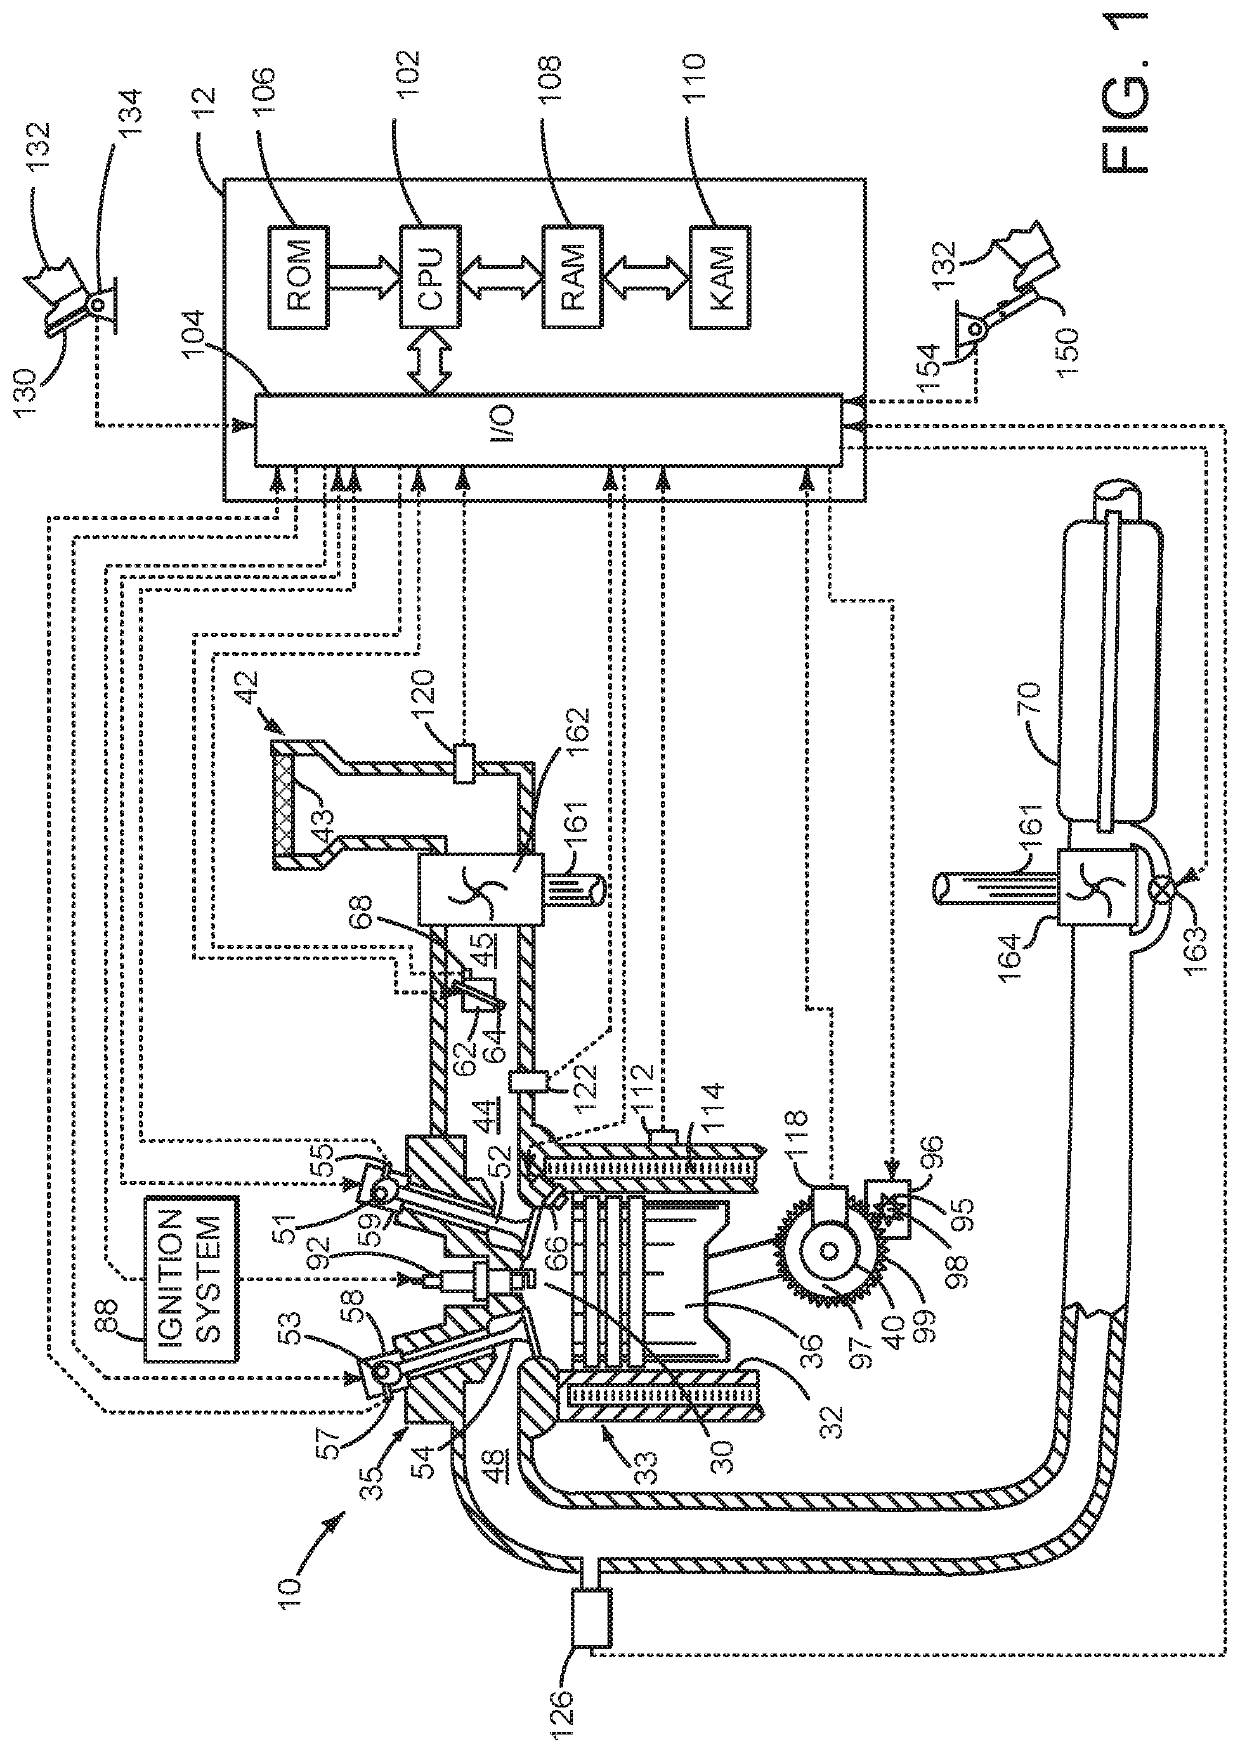 Vehicle electrical system and methods